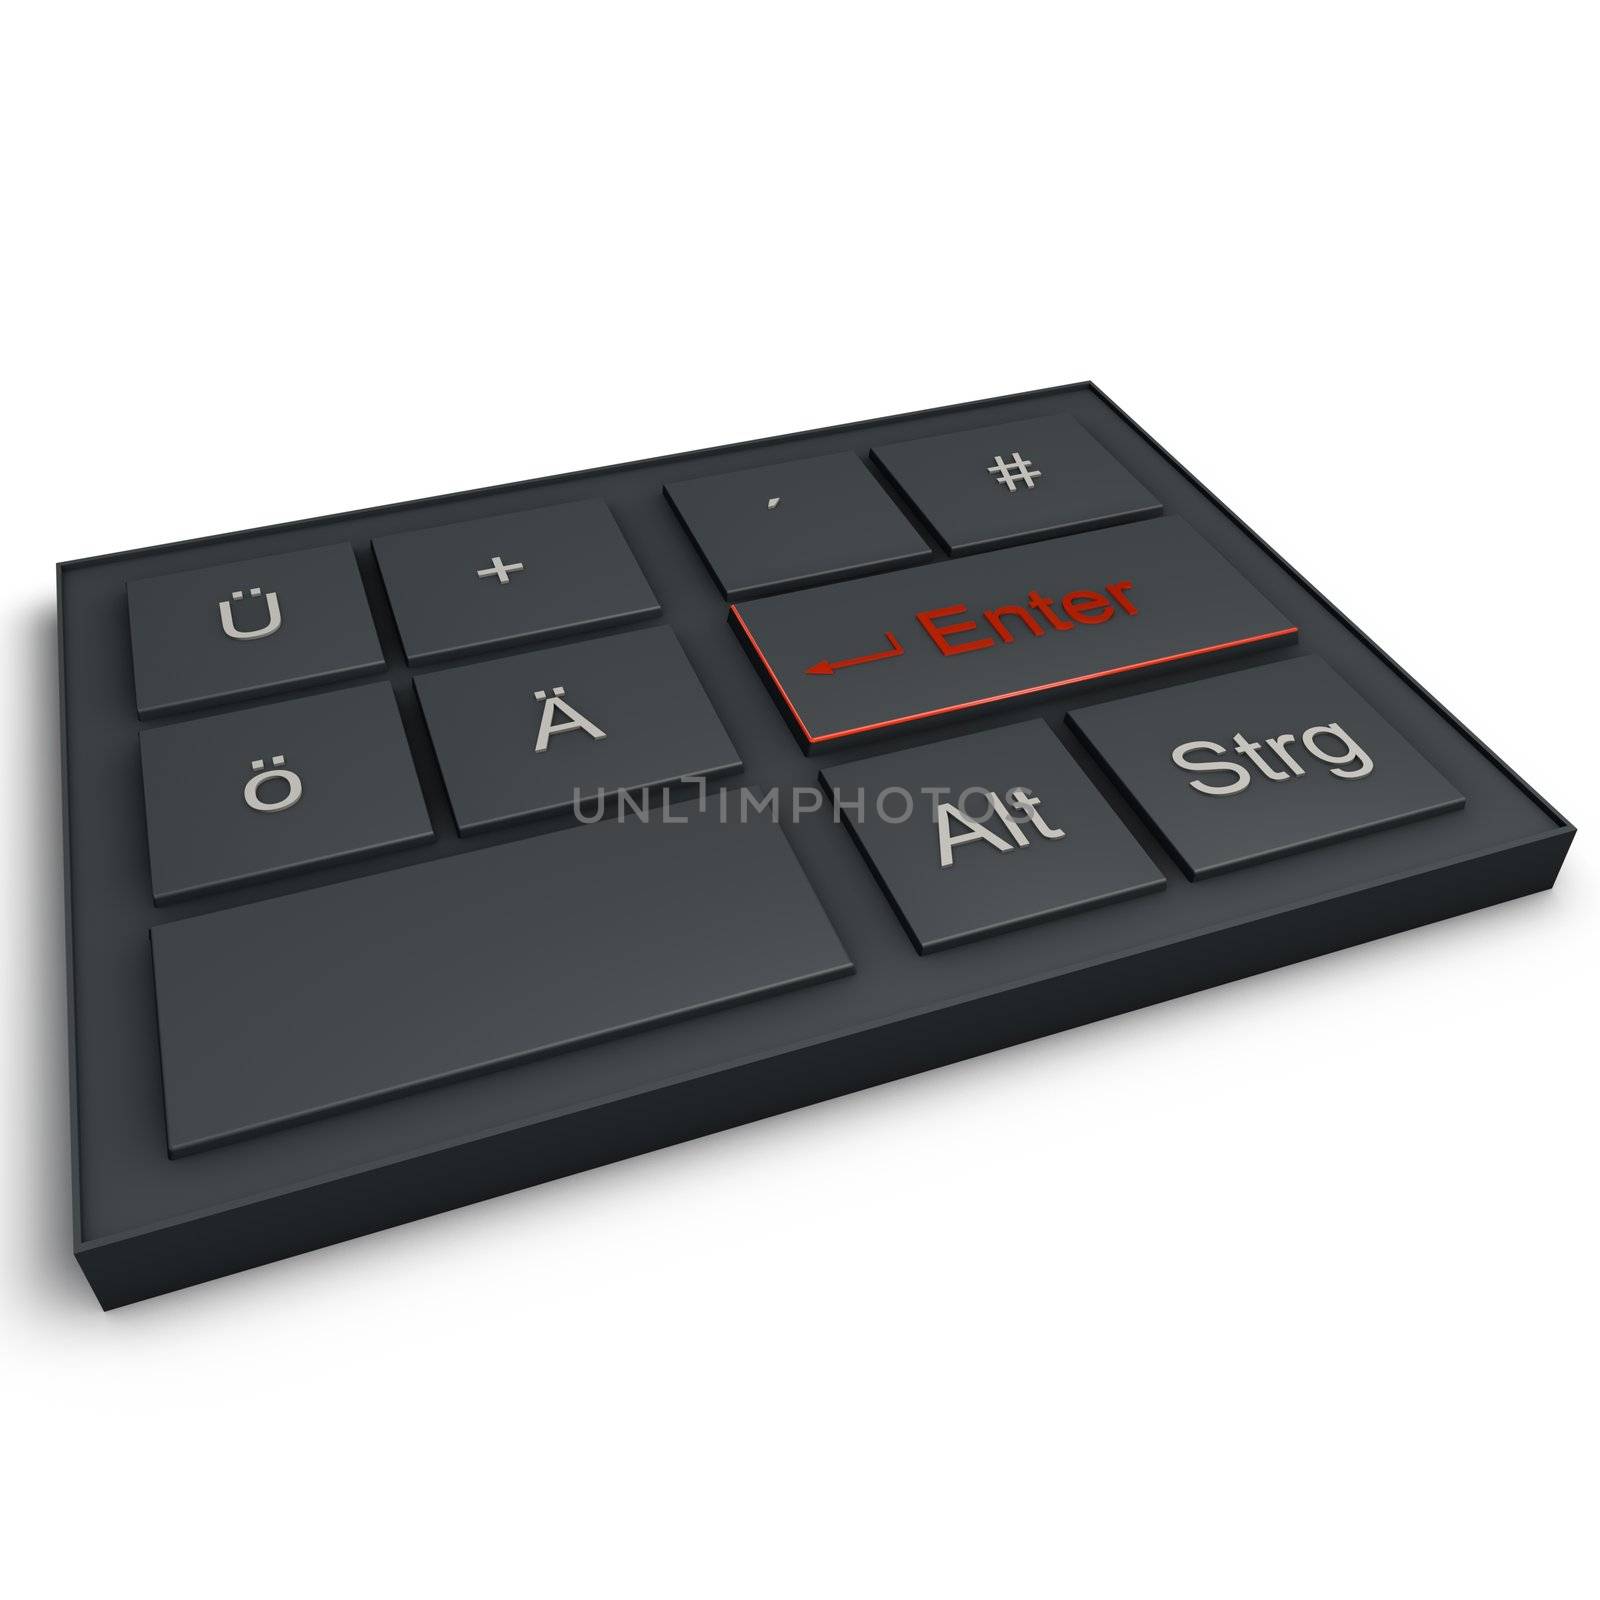 a small keypad for example to symbolize programming